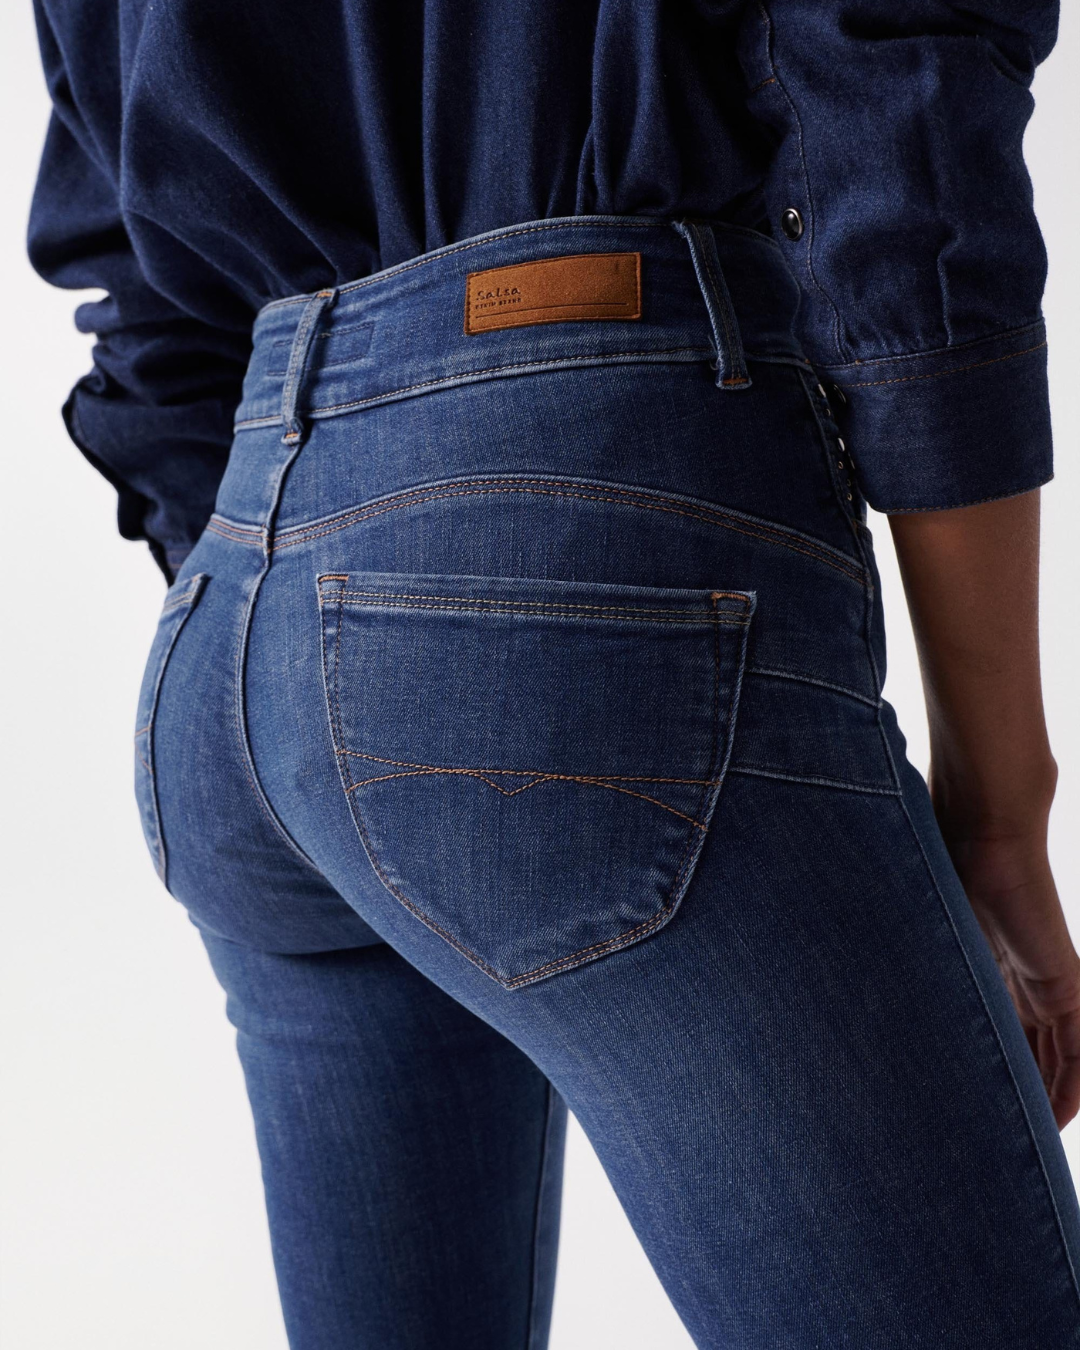 Skinny push in secret jeans with details on the pocket